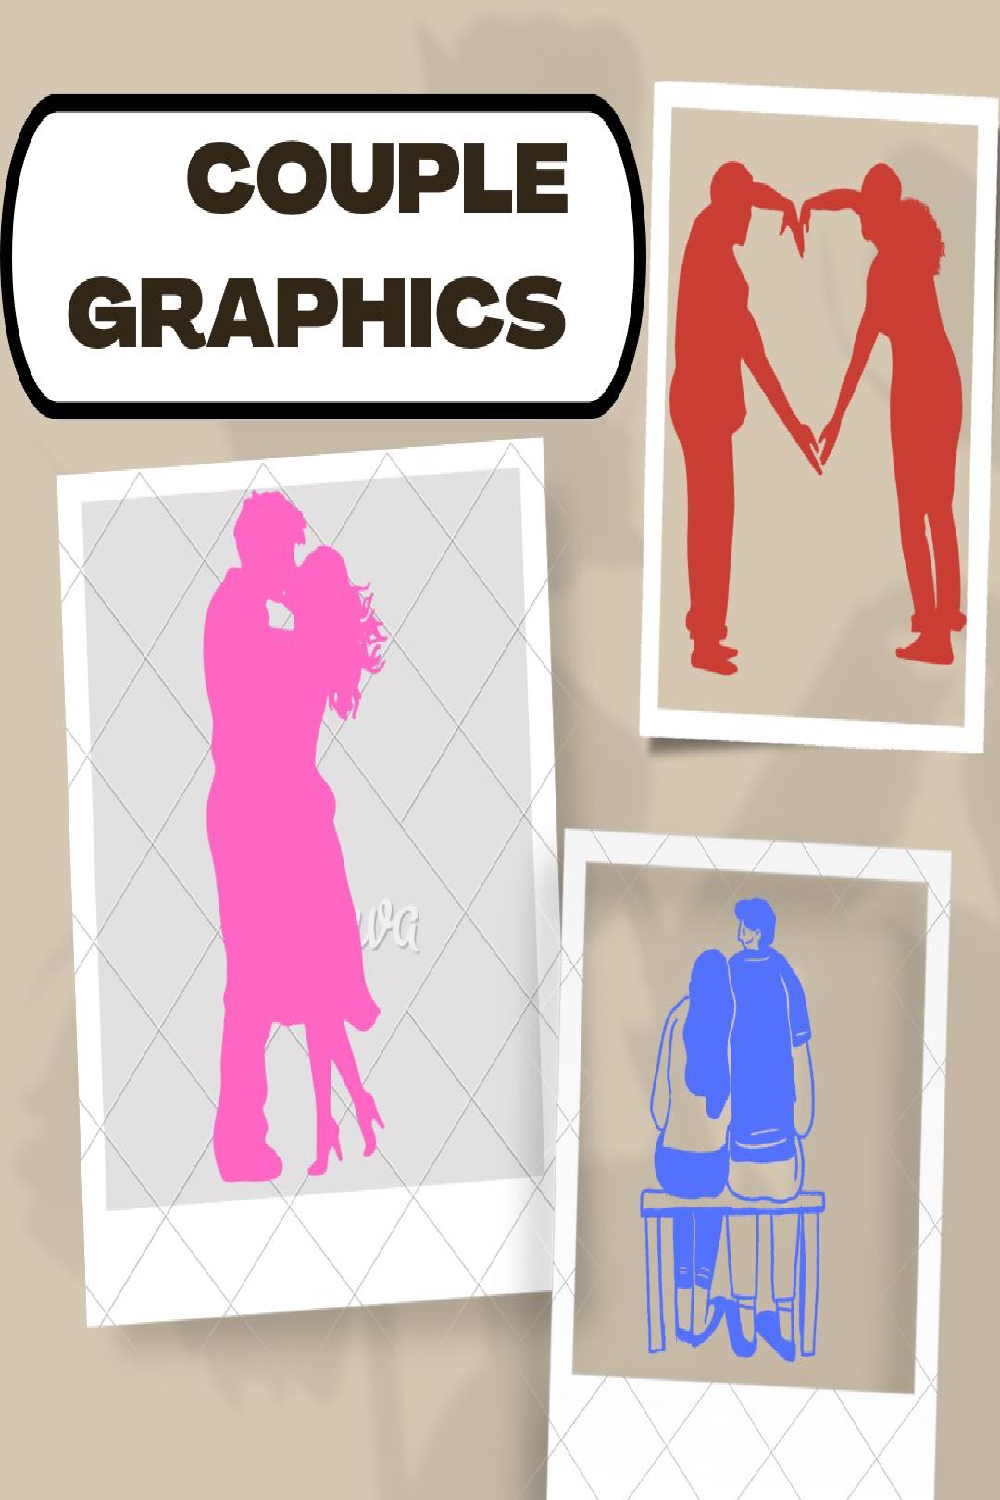 Couple graphics pinterest preview image.